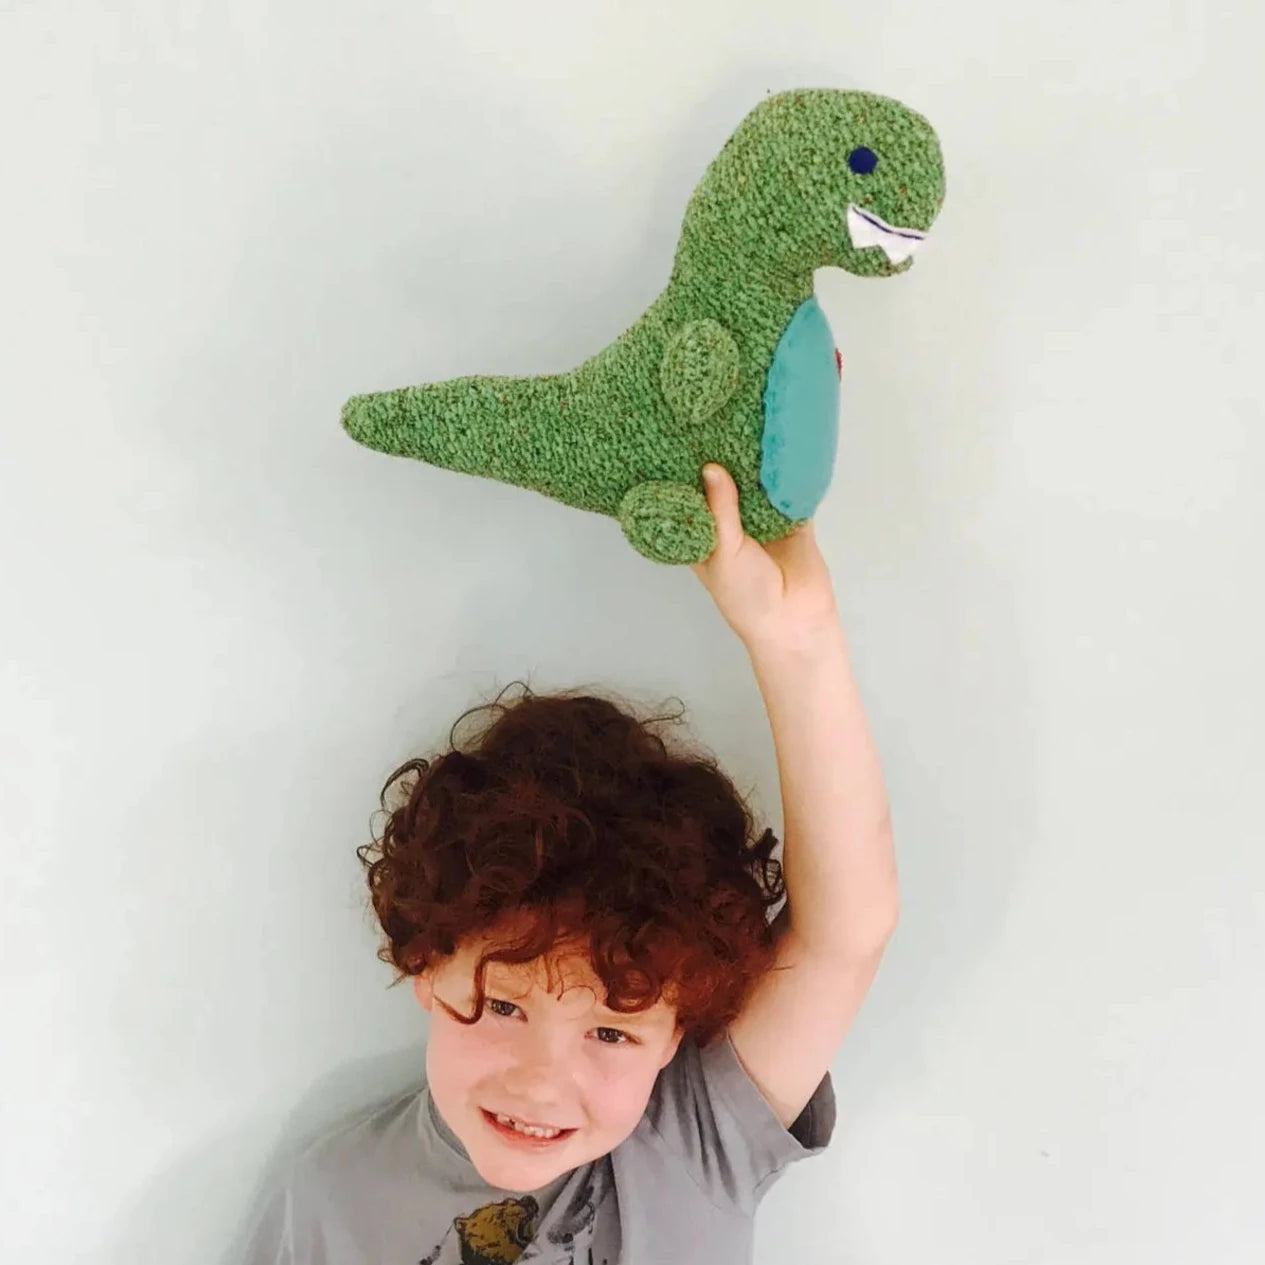 little boy holding a handmade tree stuffed animal in the air